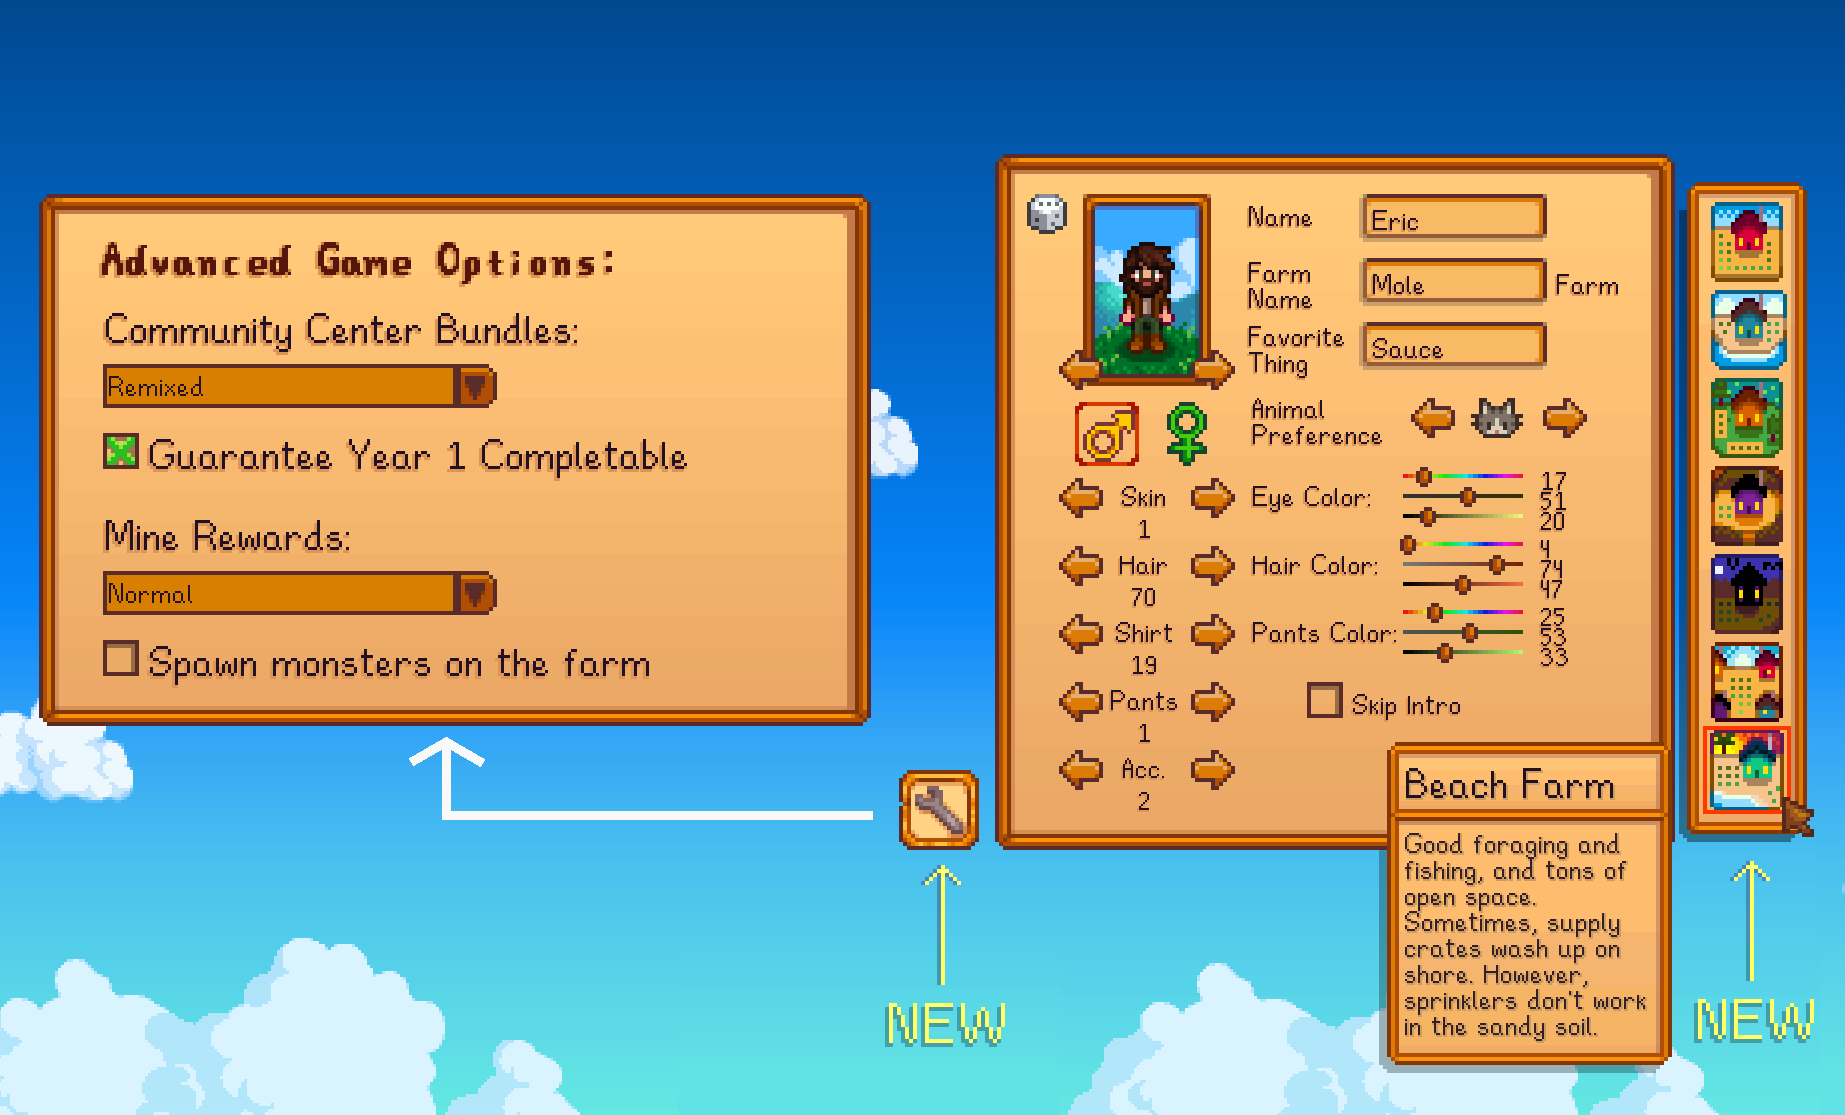 Stardew Valley 1 5 Will Have A New Farm Type And Advanced Game Options Menu Alongside All Previously Revealed Features Toucharcade